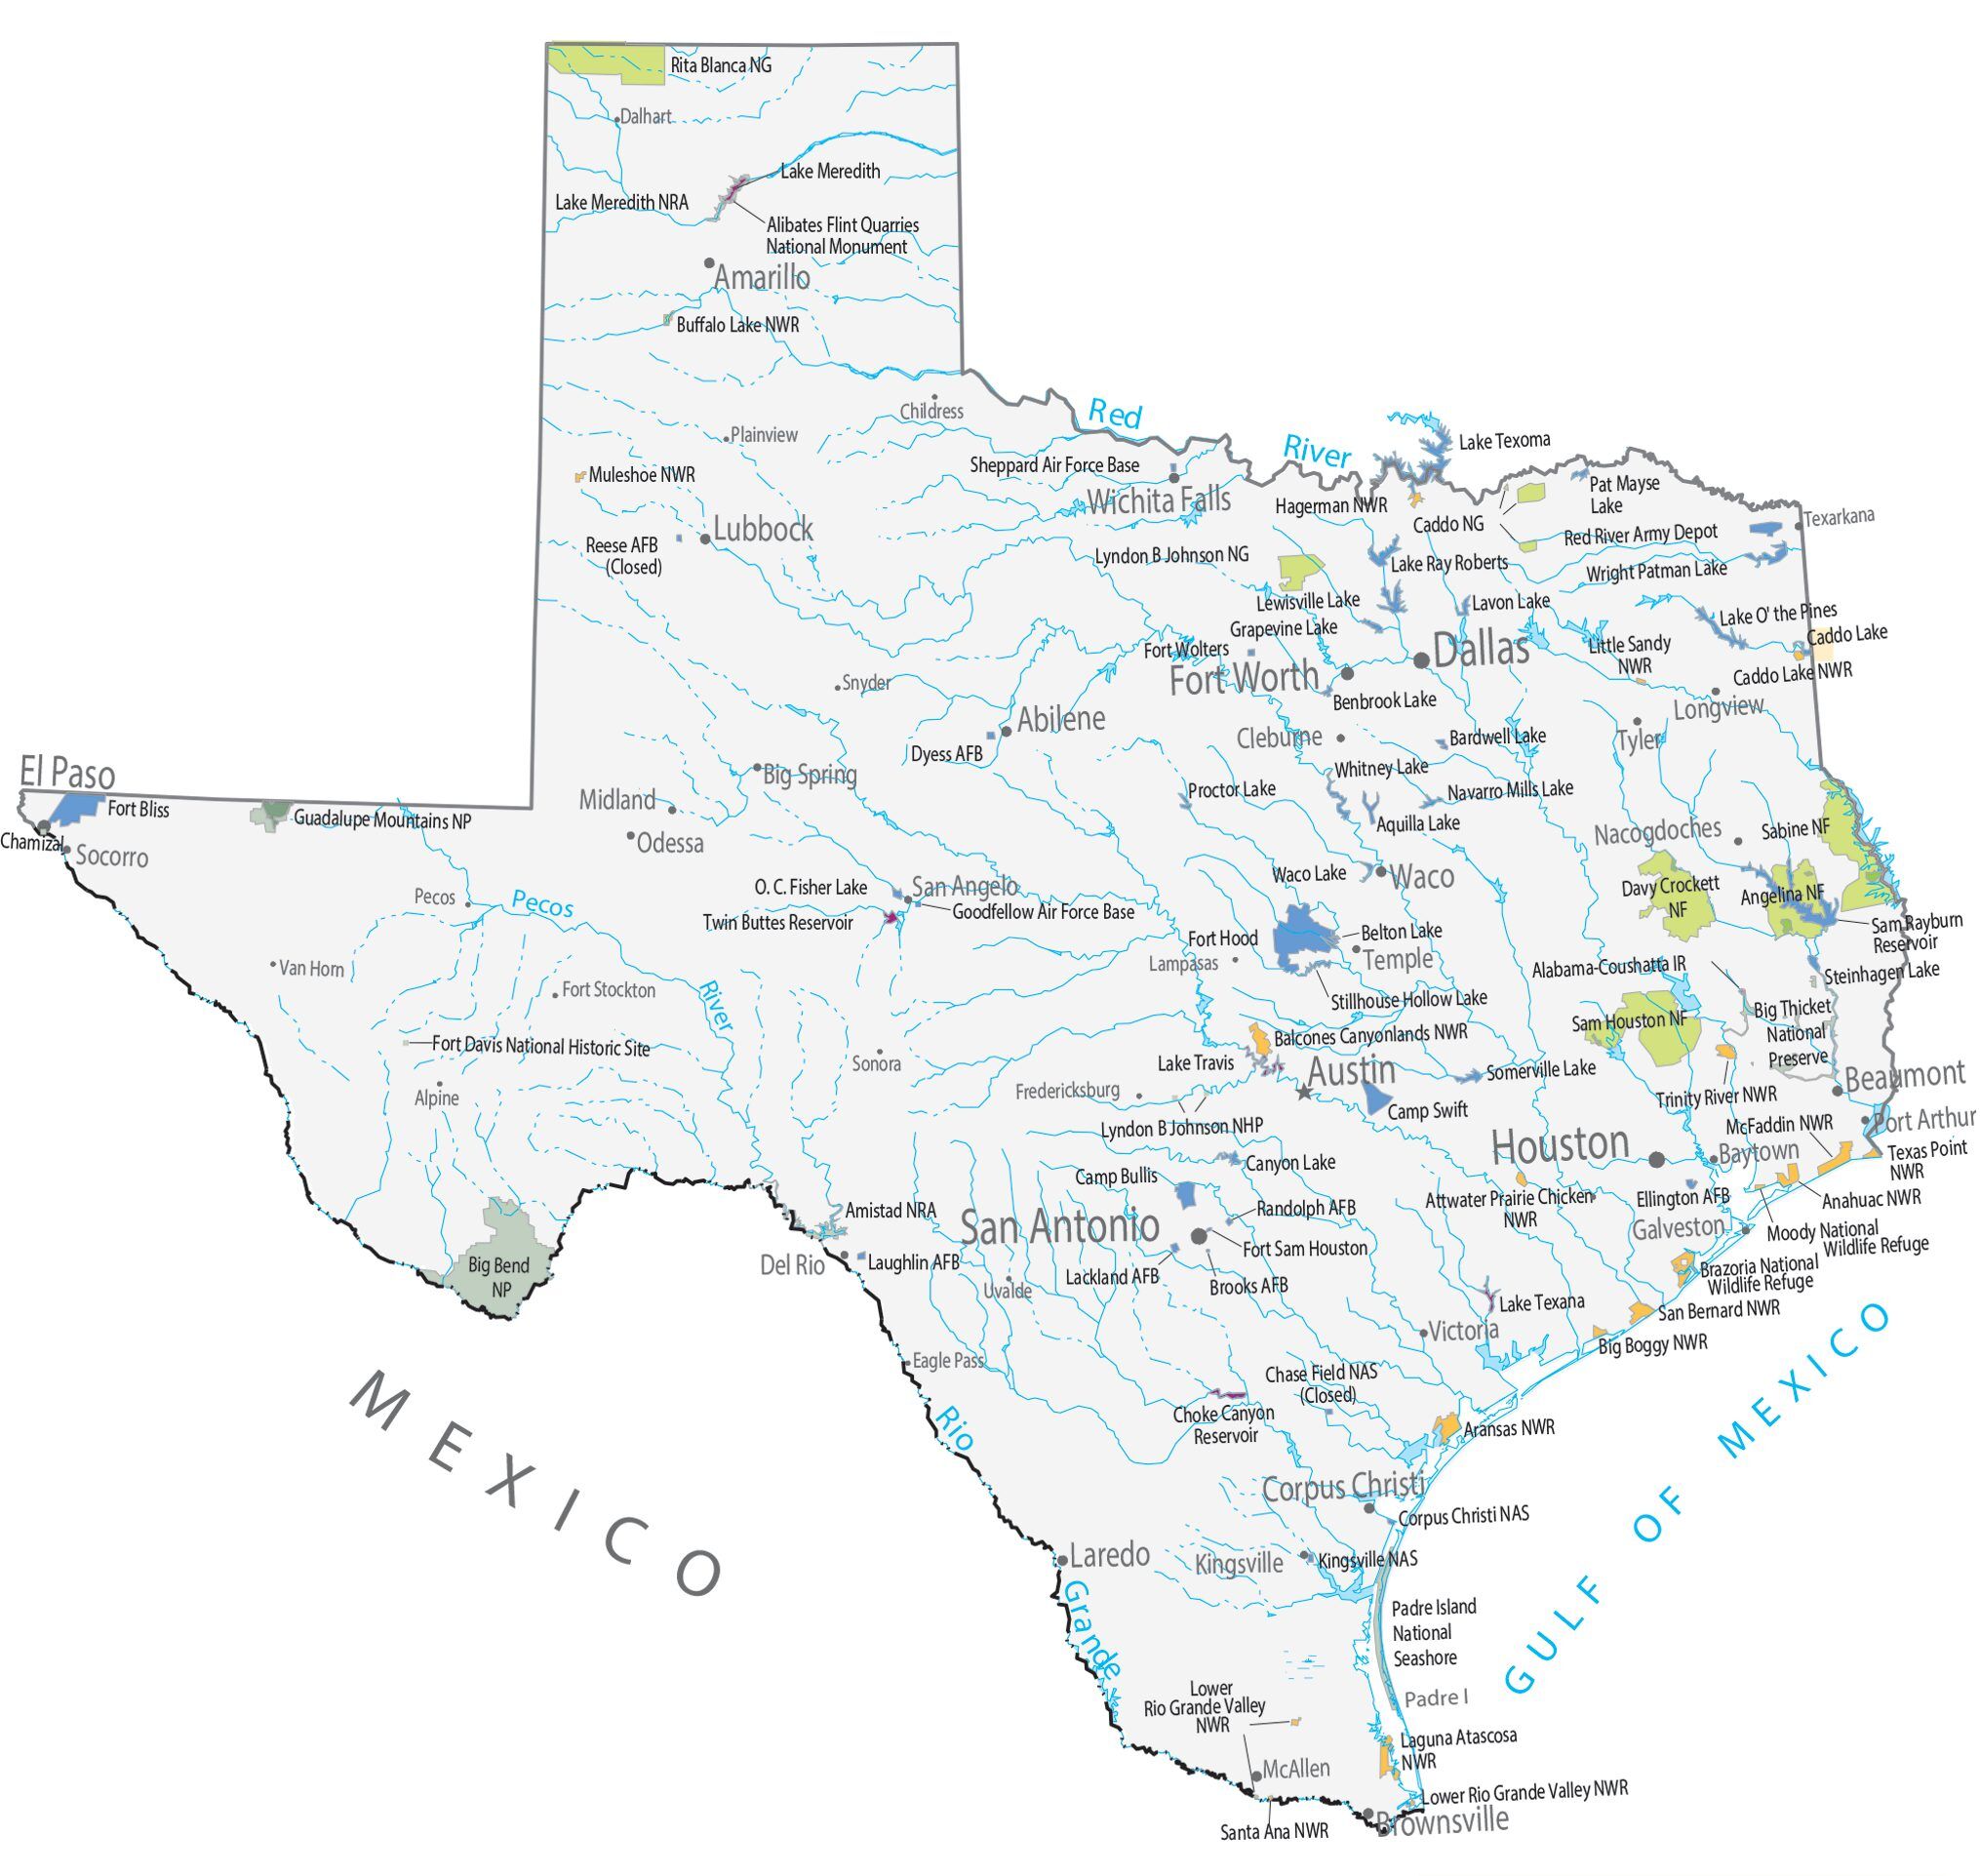 Texas State Map - Places and Landmarks - GIS Geography